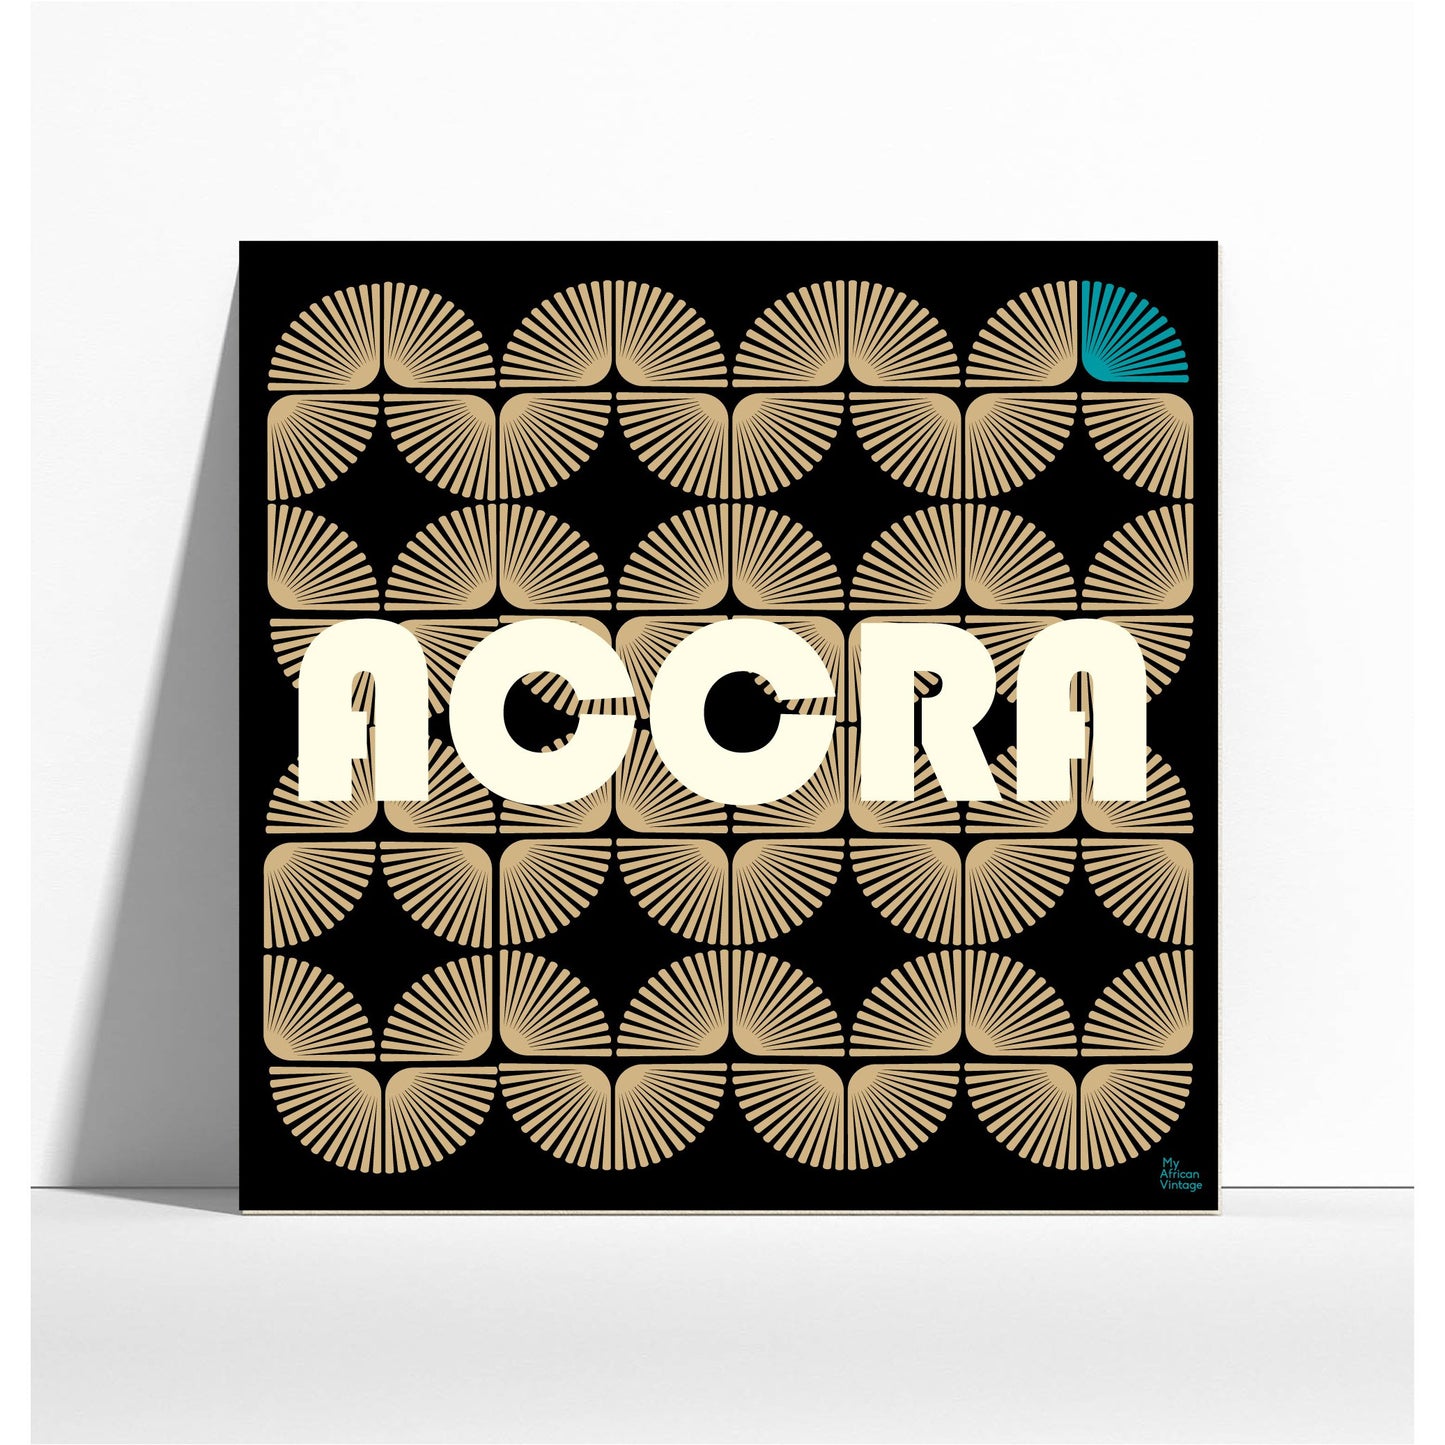 "Accra" retro style poster - "My African Vintage" collection